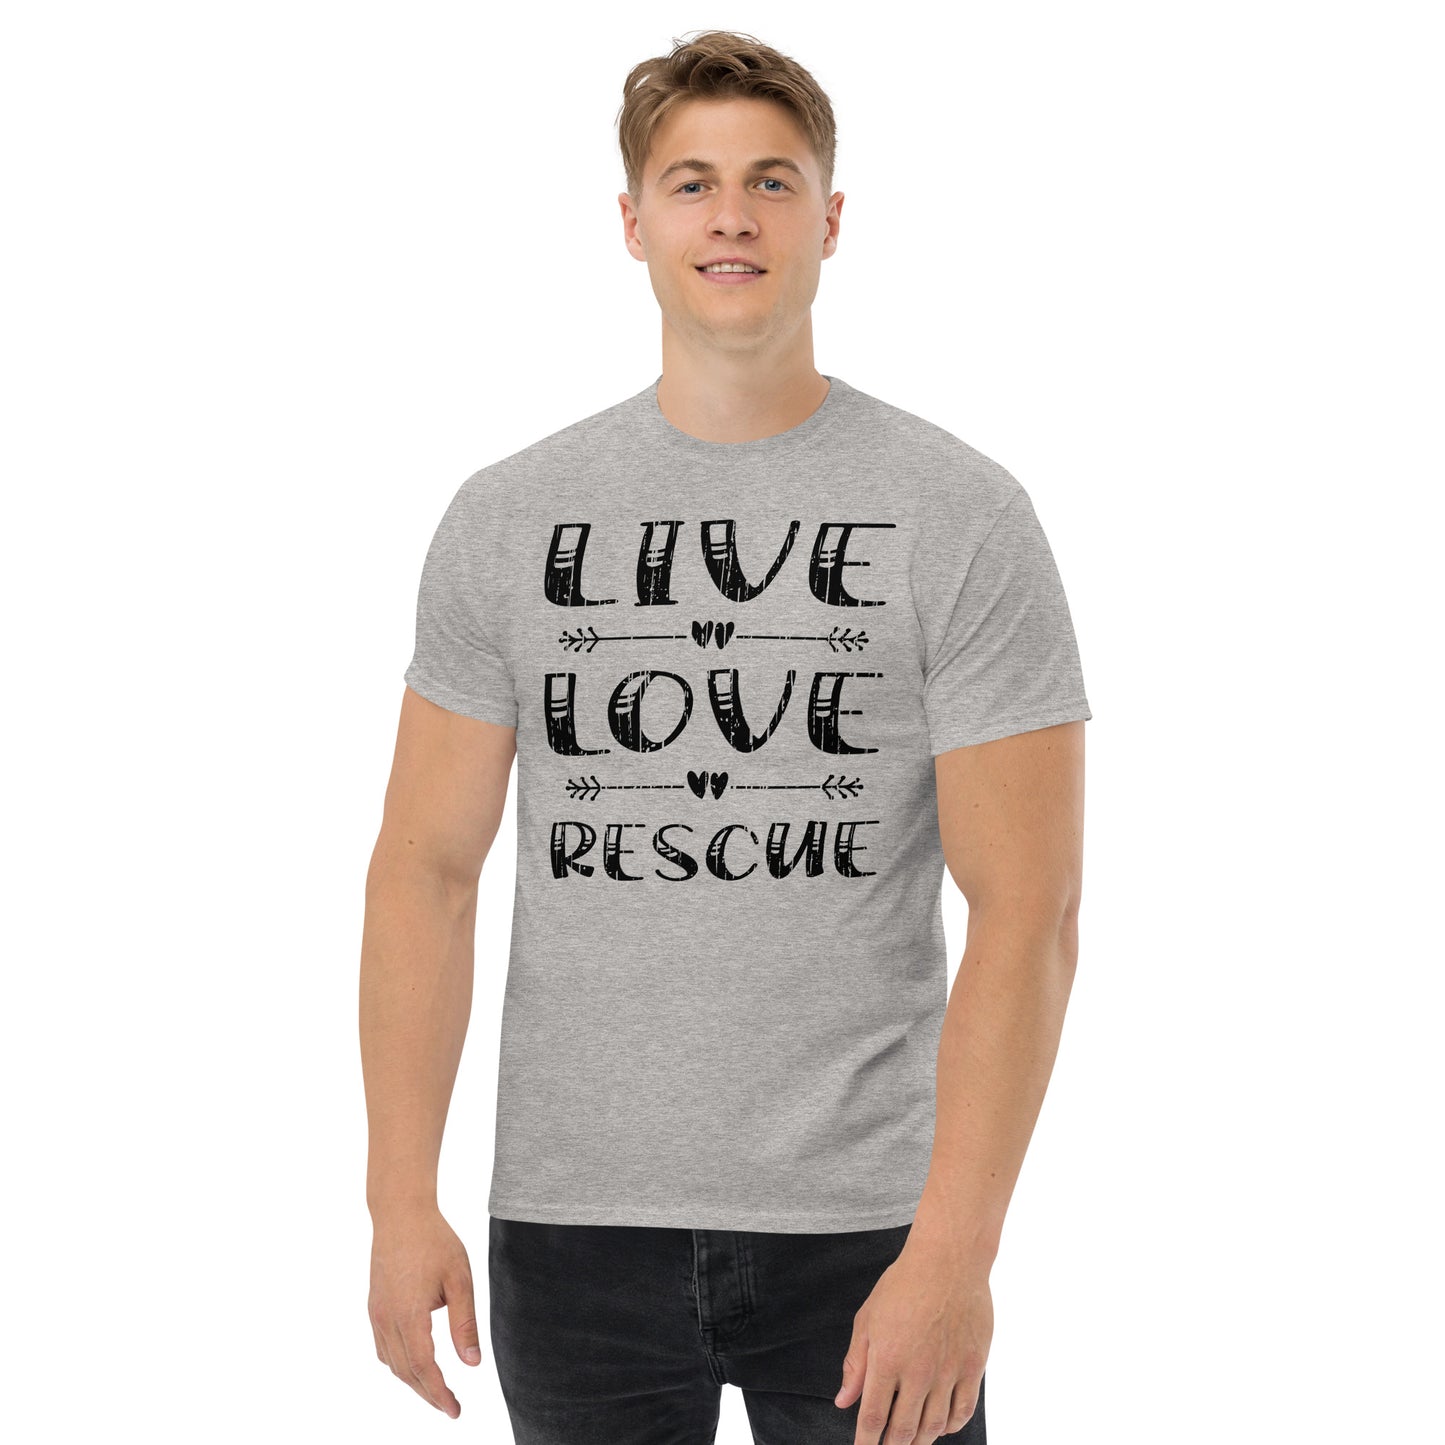 Live love rescue men’s t-shirts by Dog Artistry sport grey color